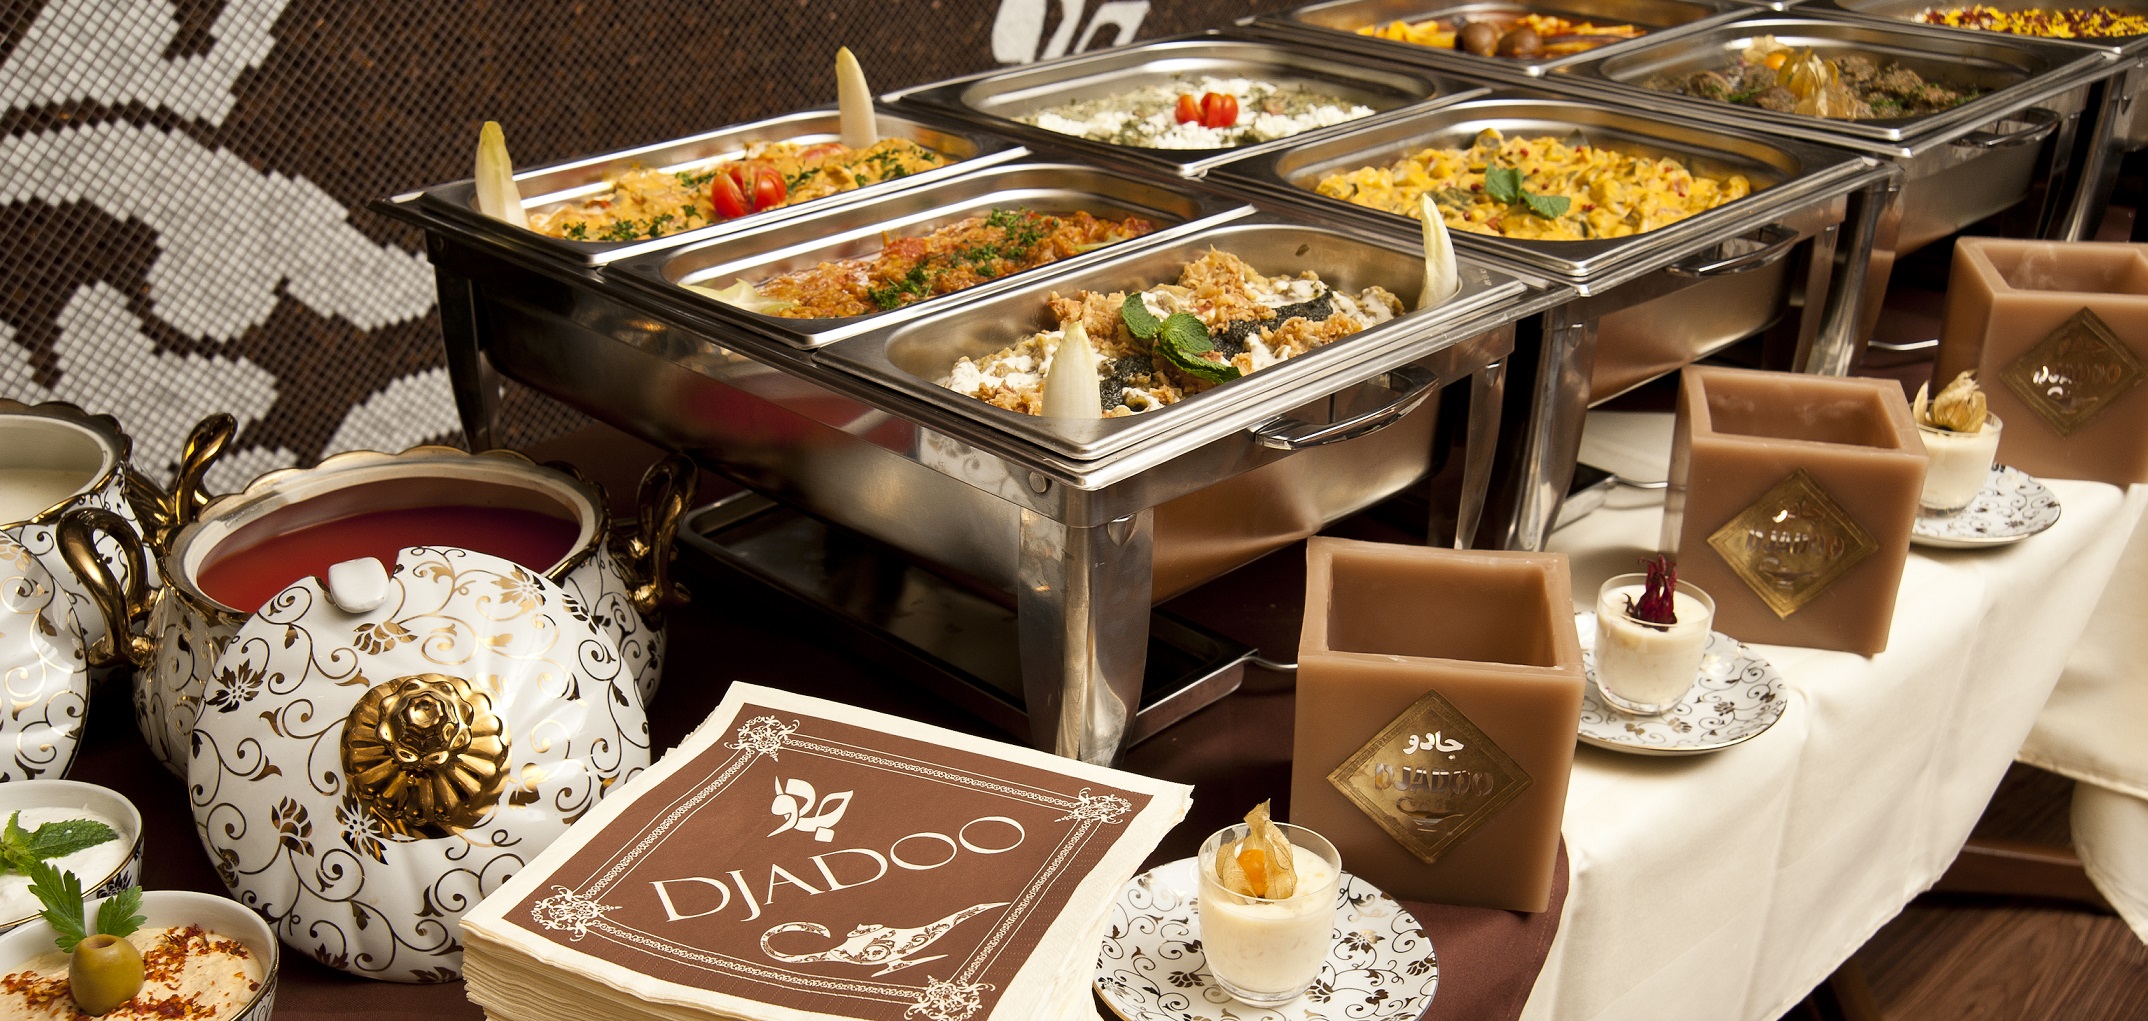 Catering-Service in Darmstadt